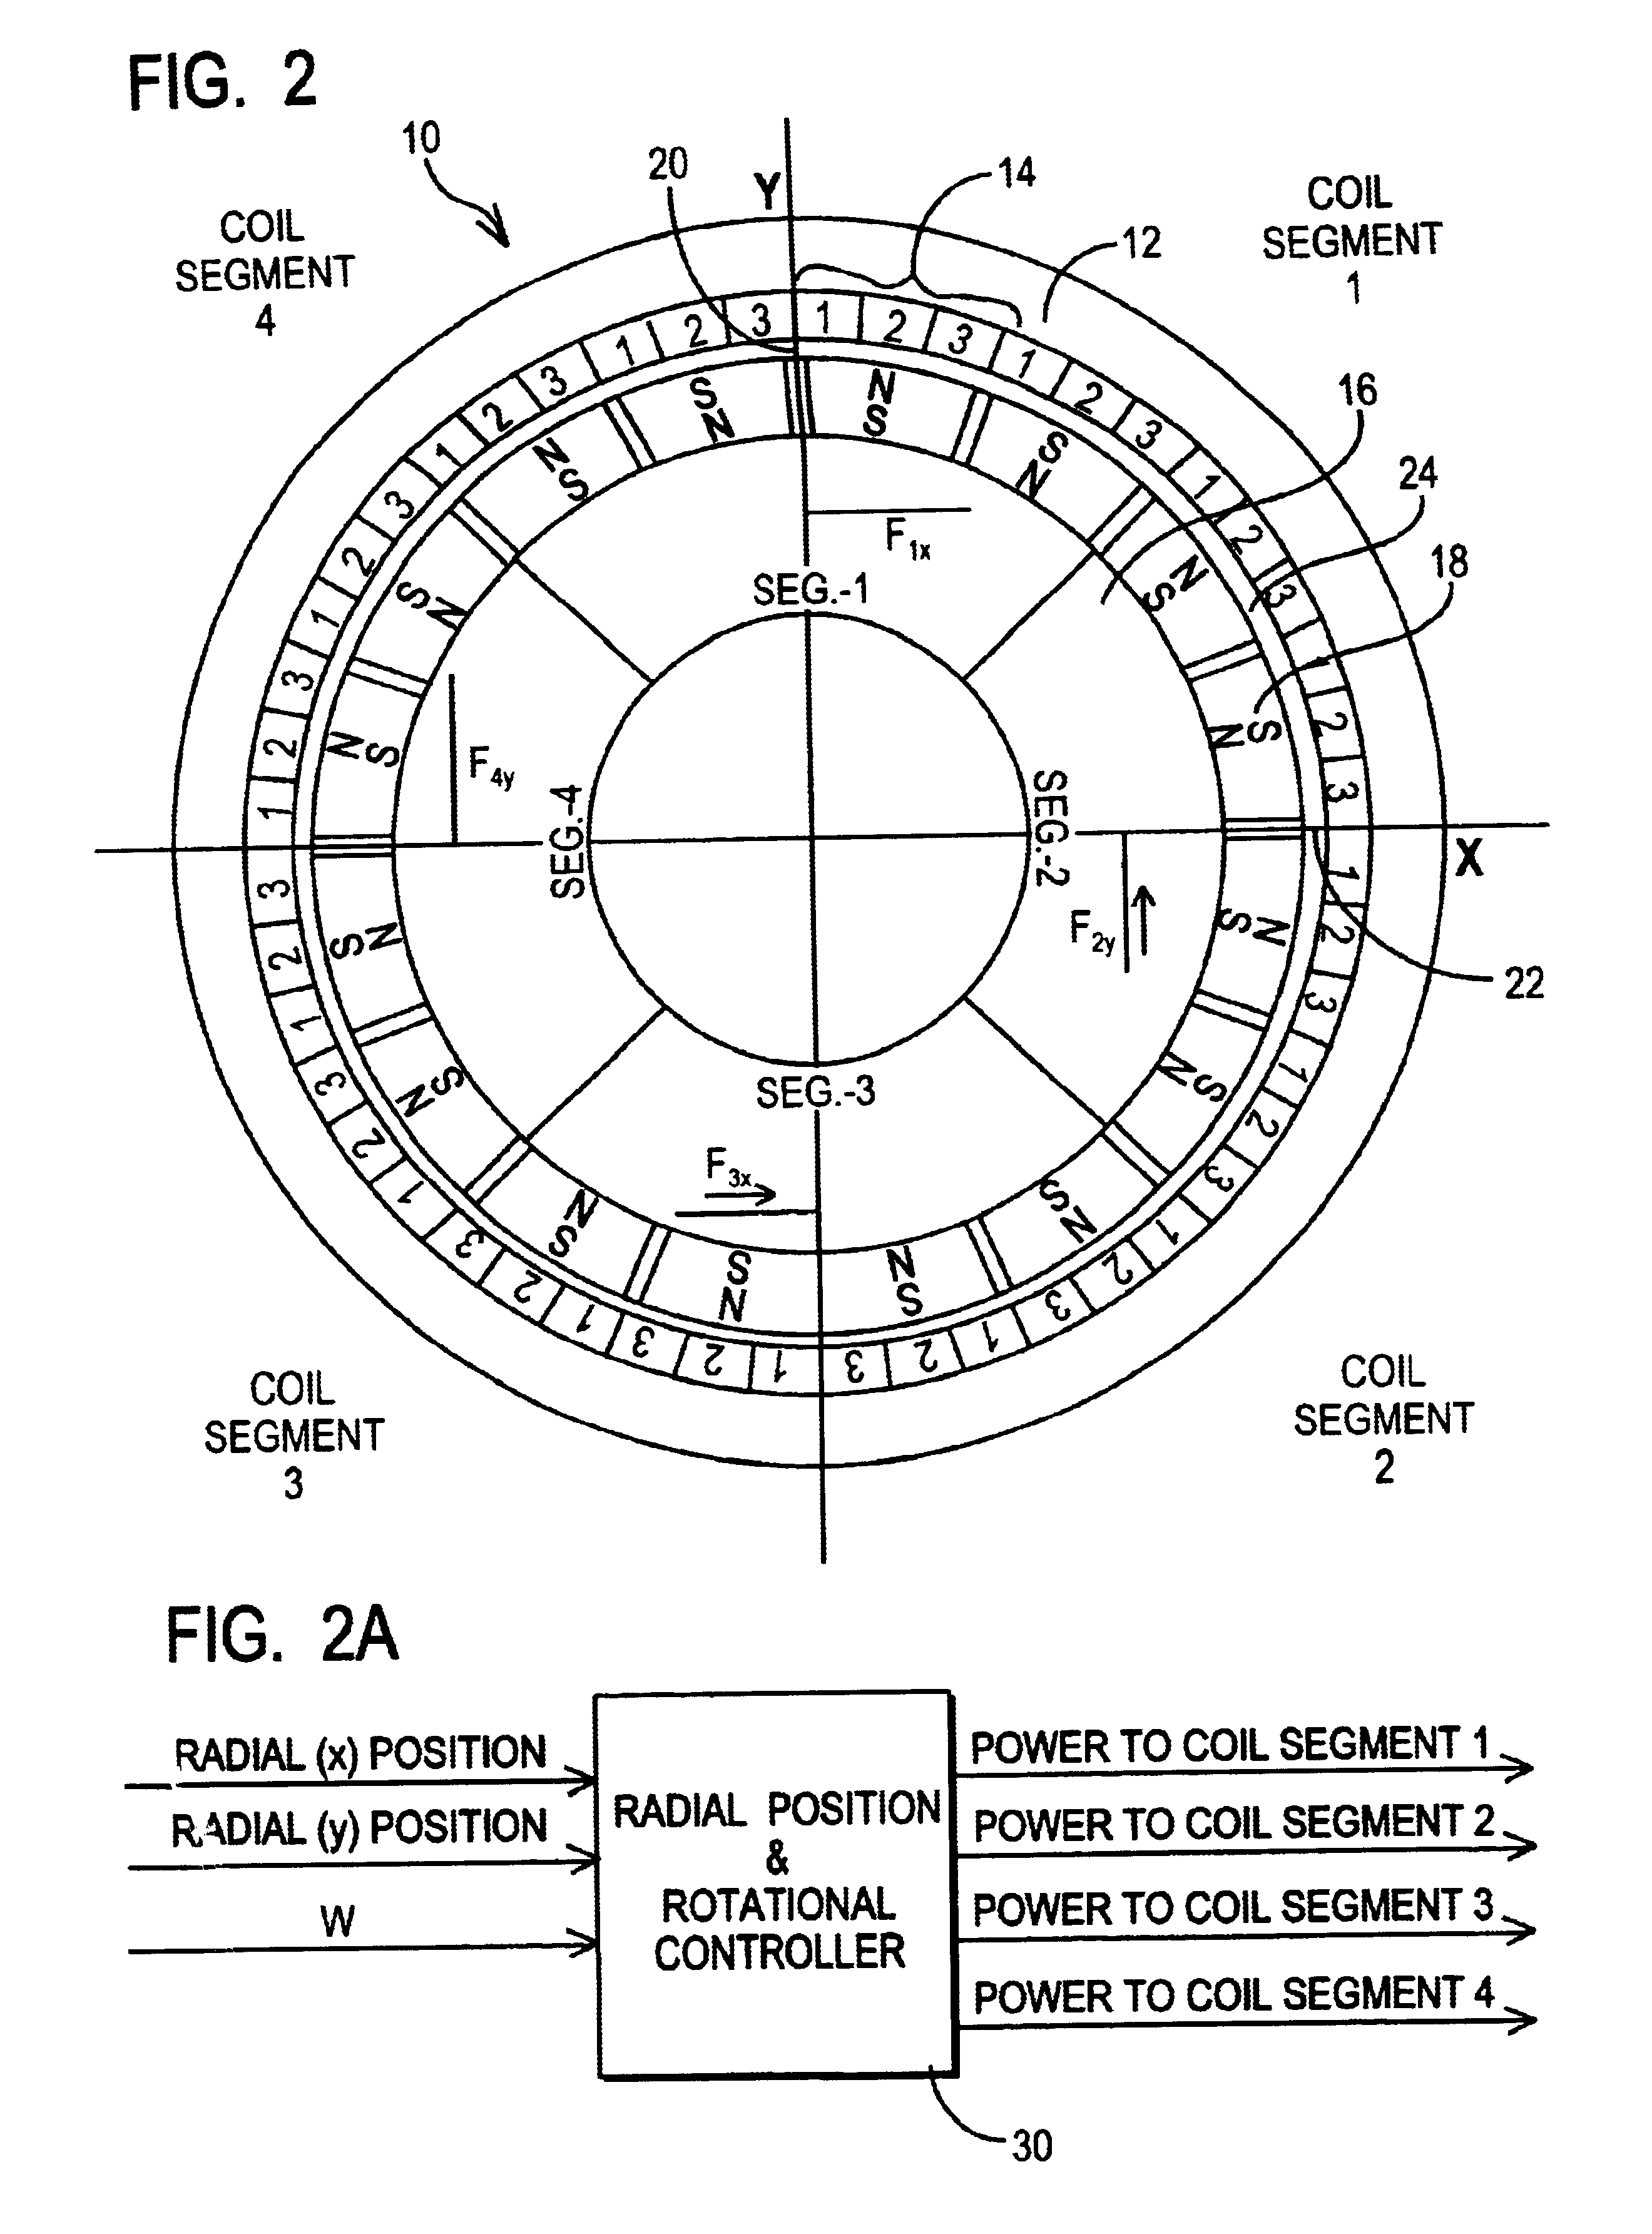 Integrated magnetic bearing